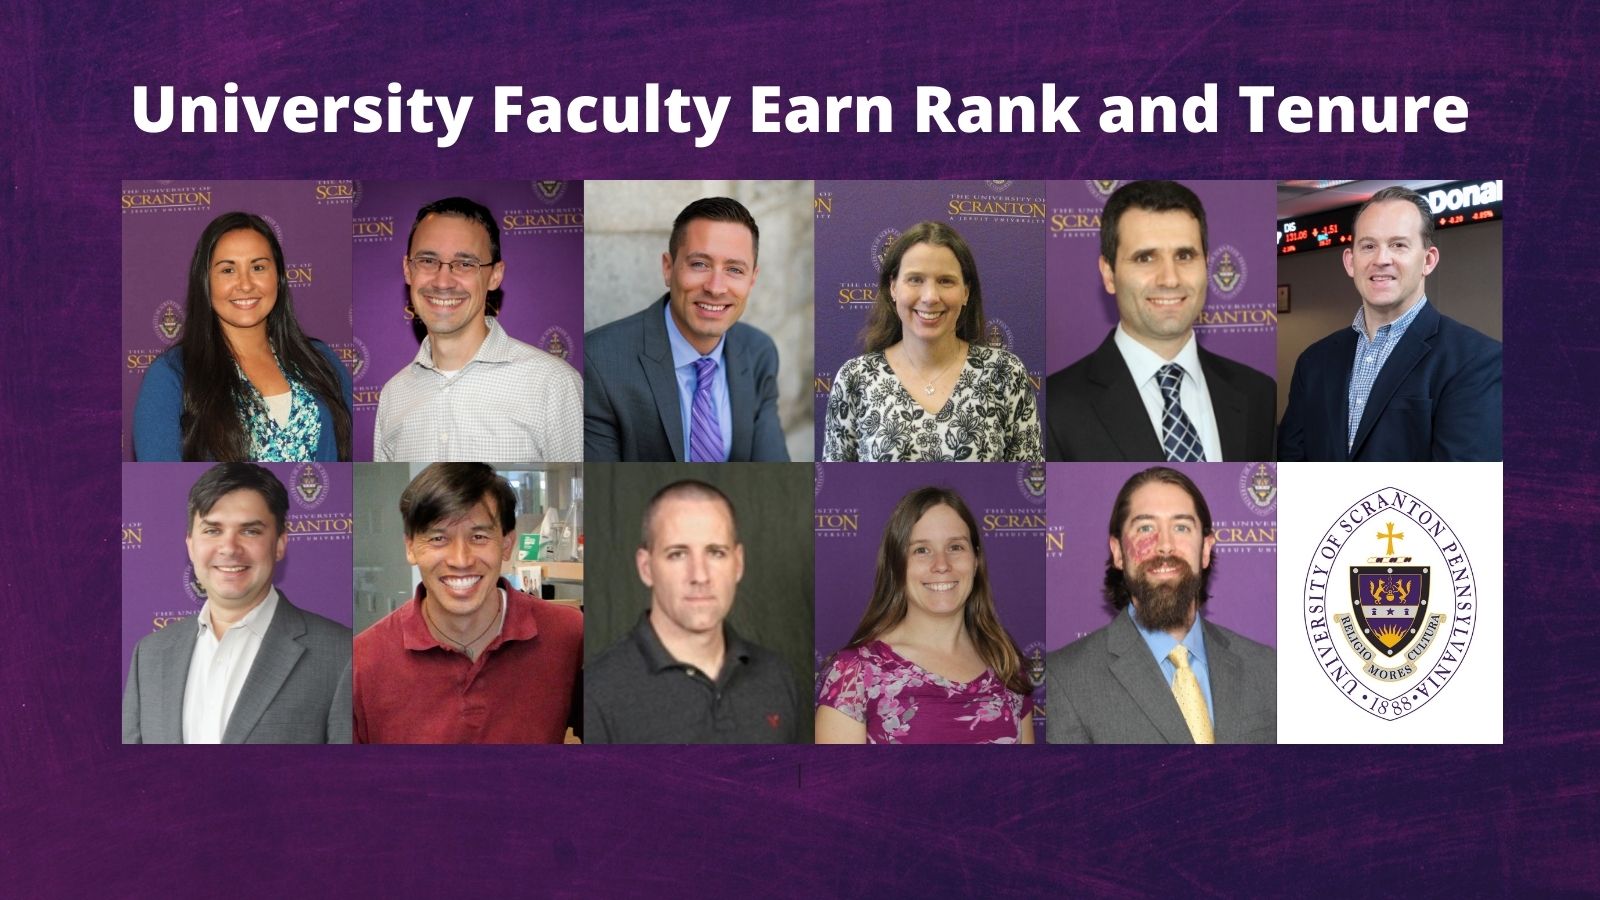 Thumbnail images of 11 faculty members granted promotions and/or tenure at The University of Scranton.